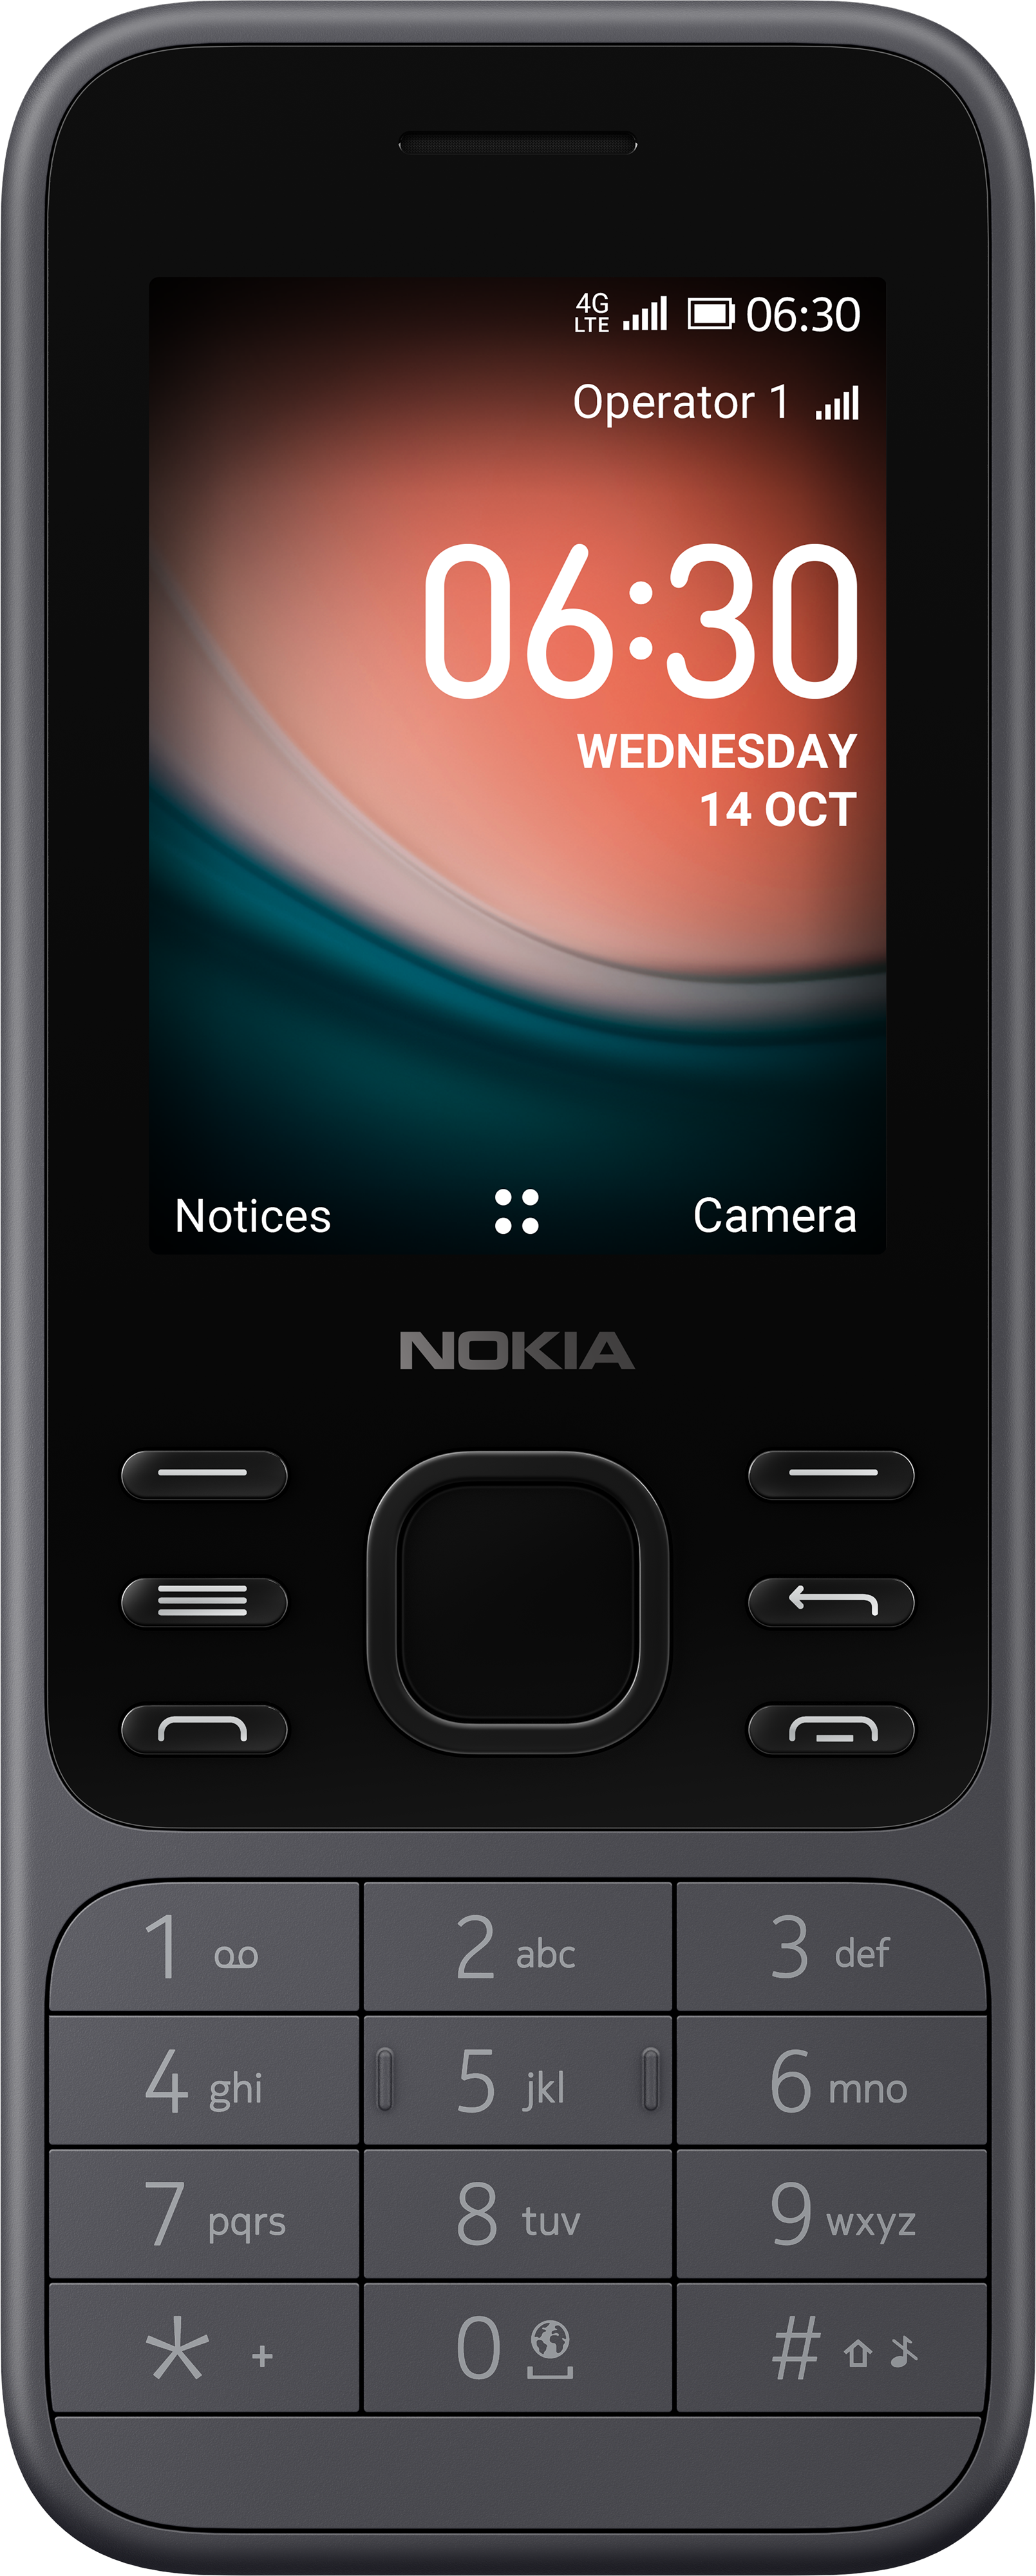 Nokia 6300 4G feature phone with WhatsApp may be coming soon to India